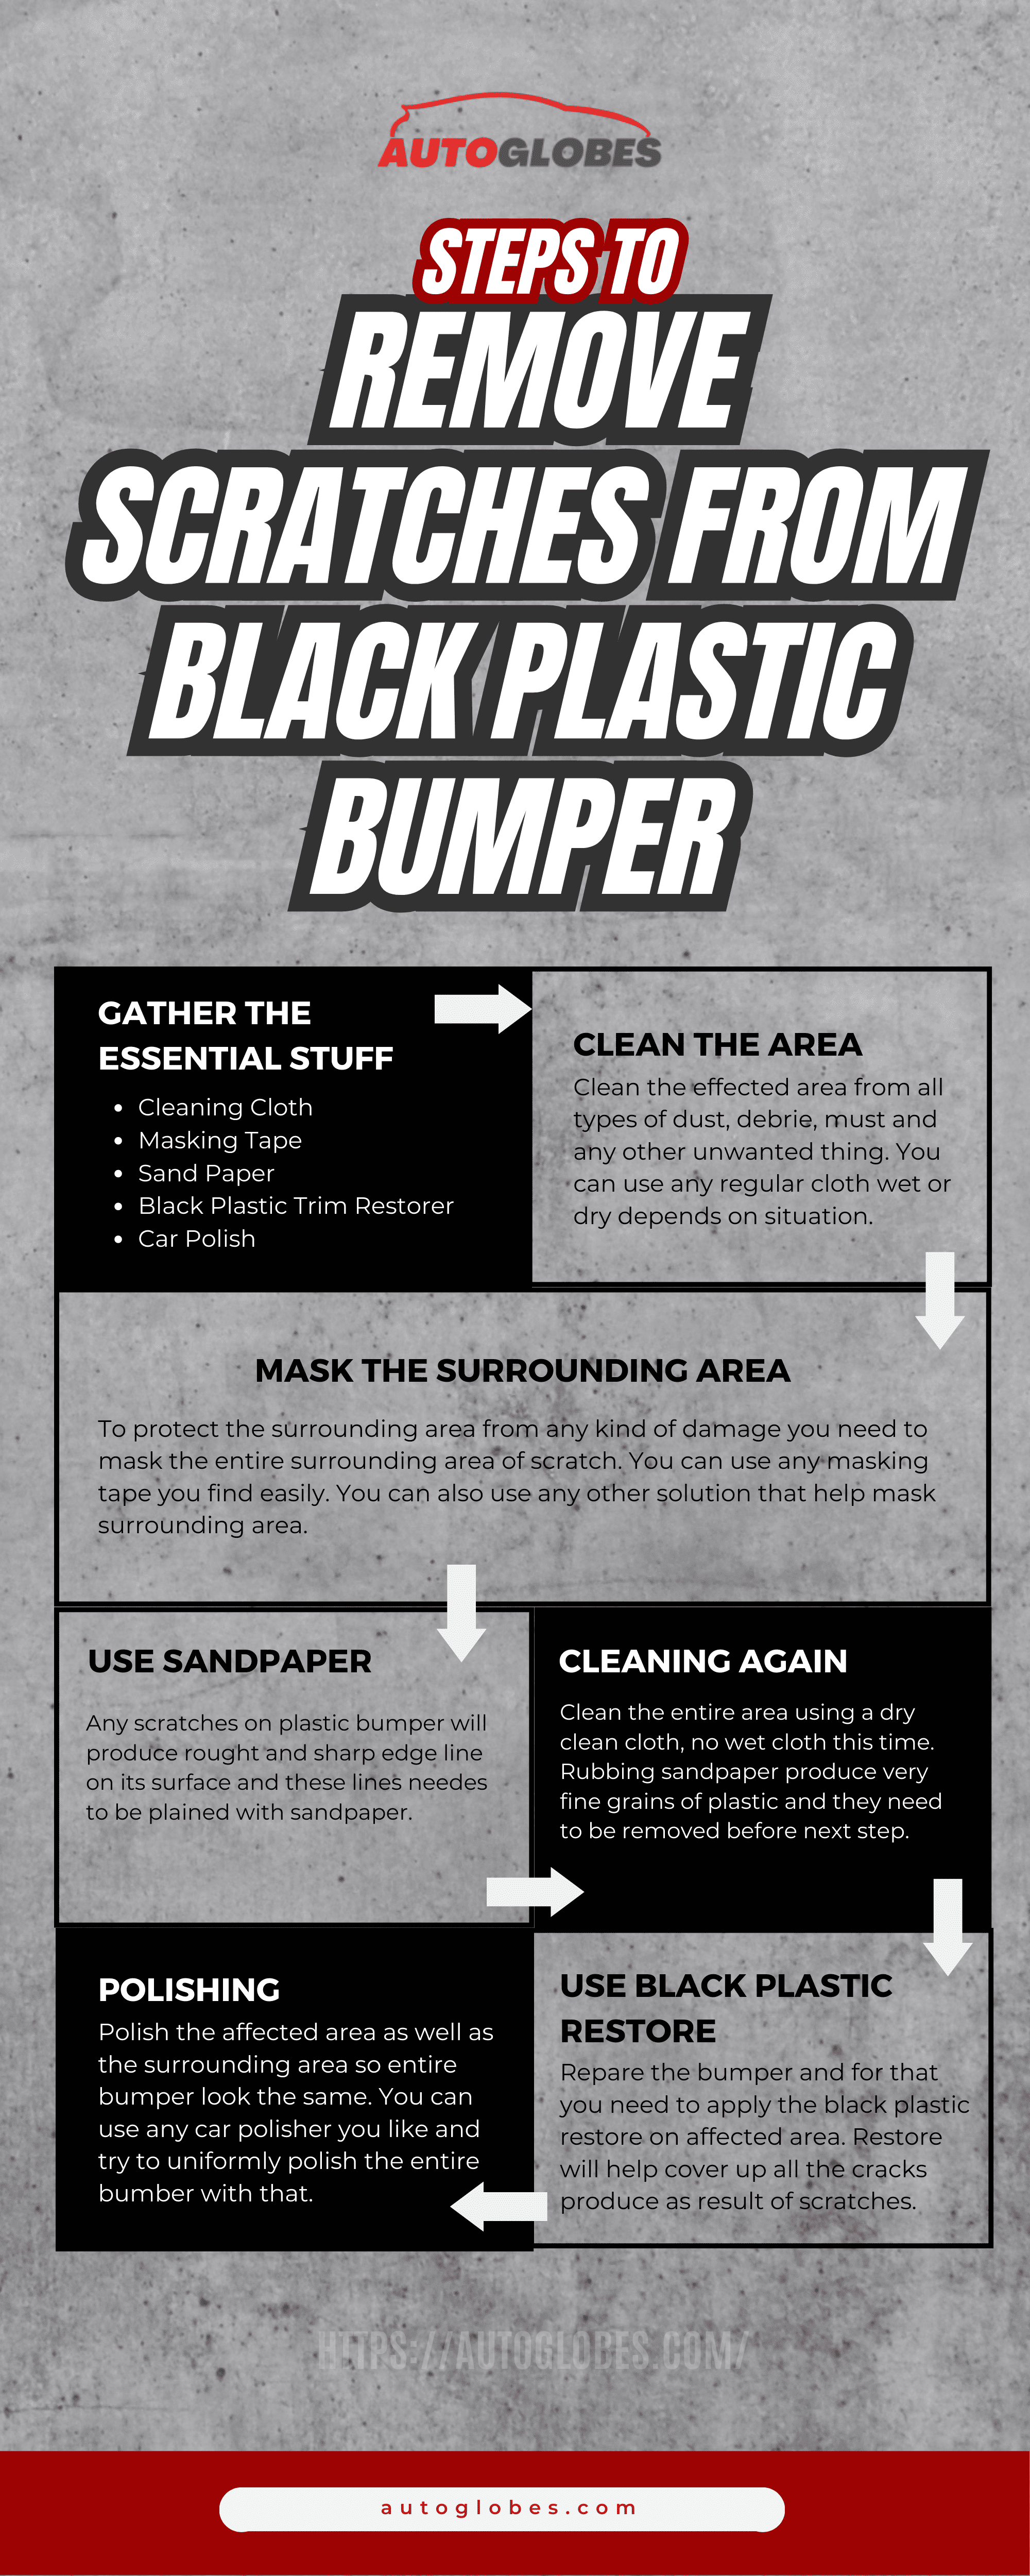 Remove Scratches From Black Plastic Bumper Infographic